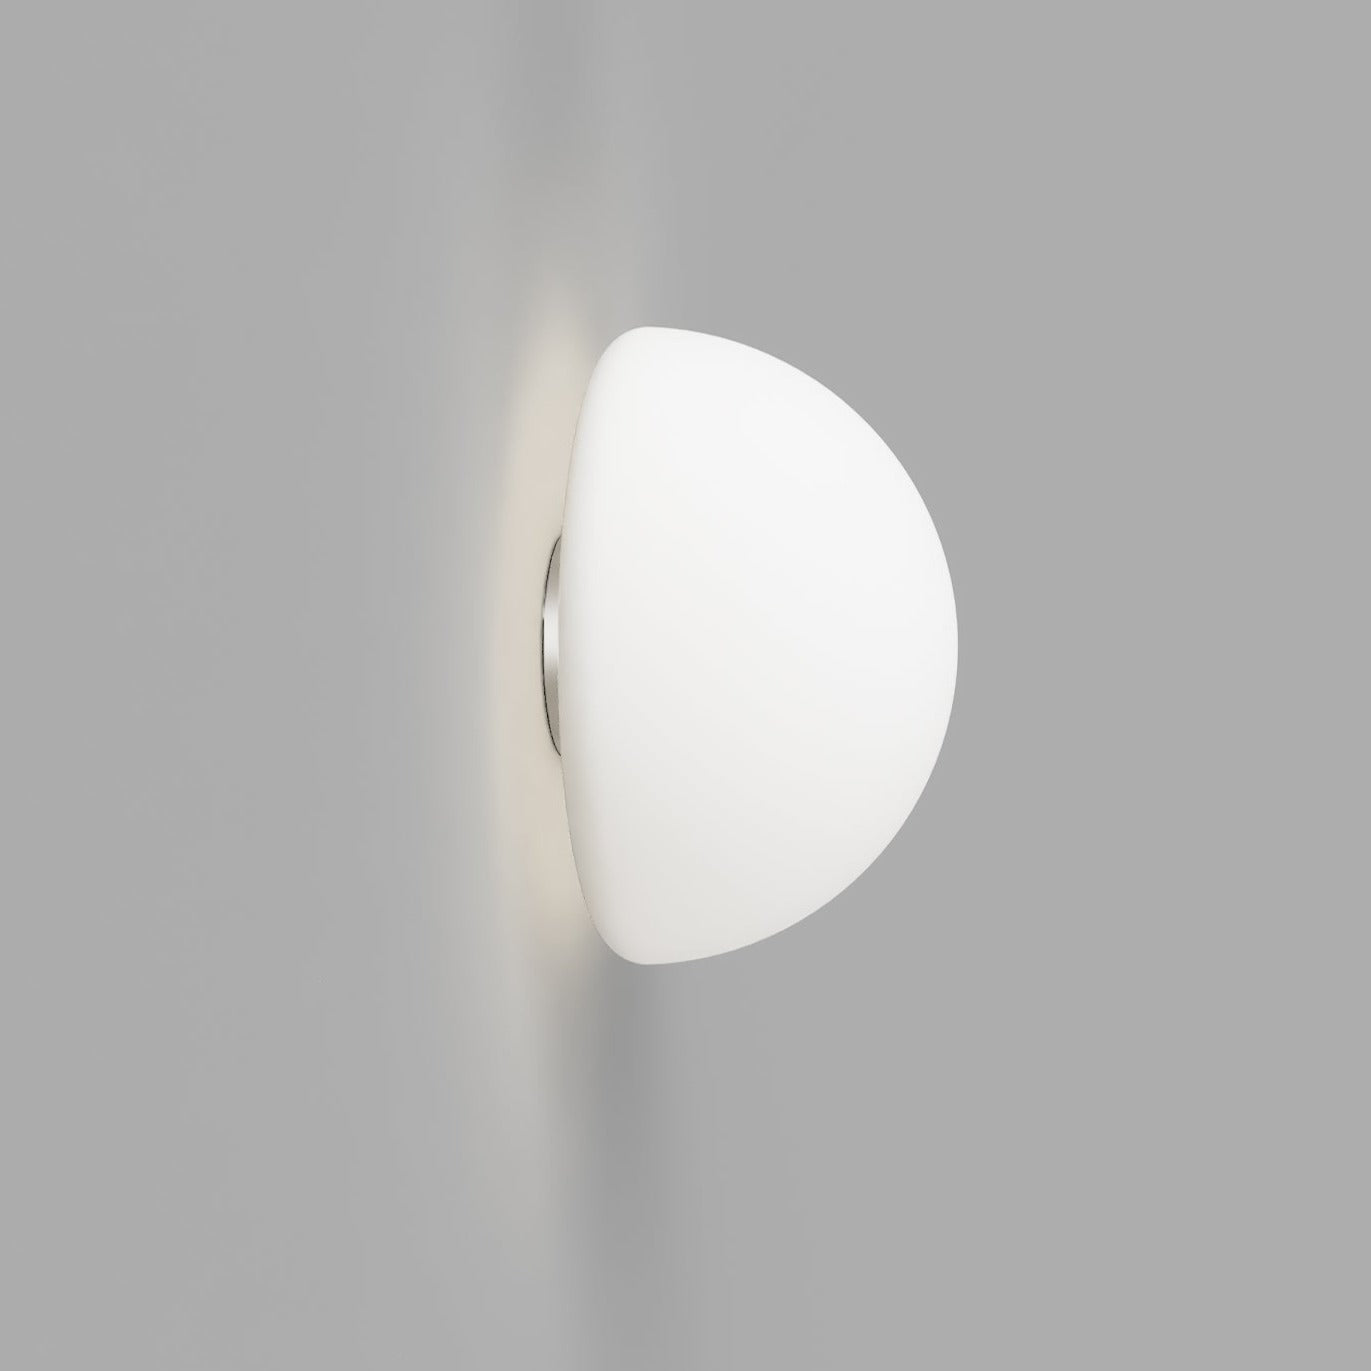 Orb Dome Mirror Wall Light